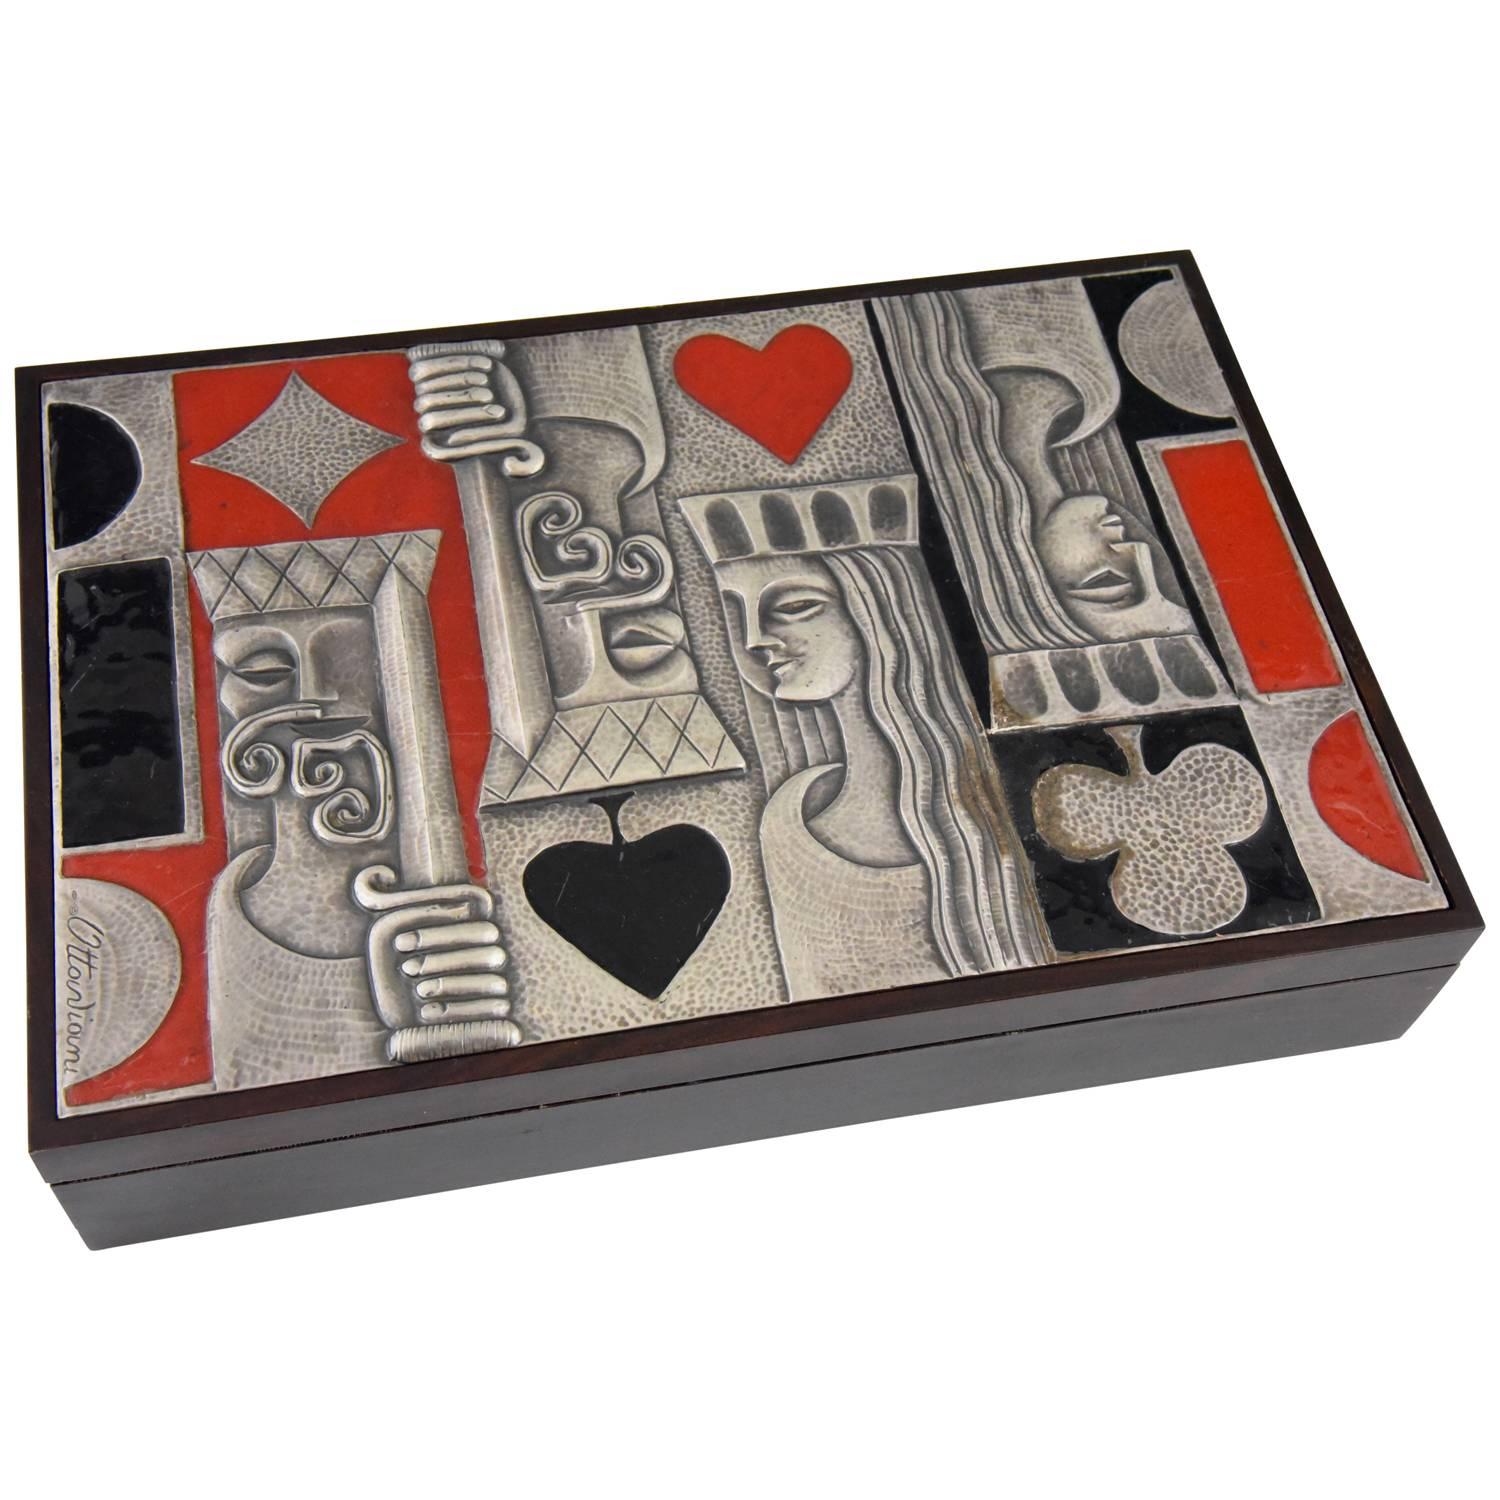 Ottaviani Card Playing Box 1960 Sterling Silver, Enamel and Wood Italy